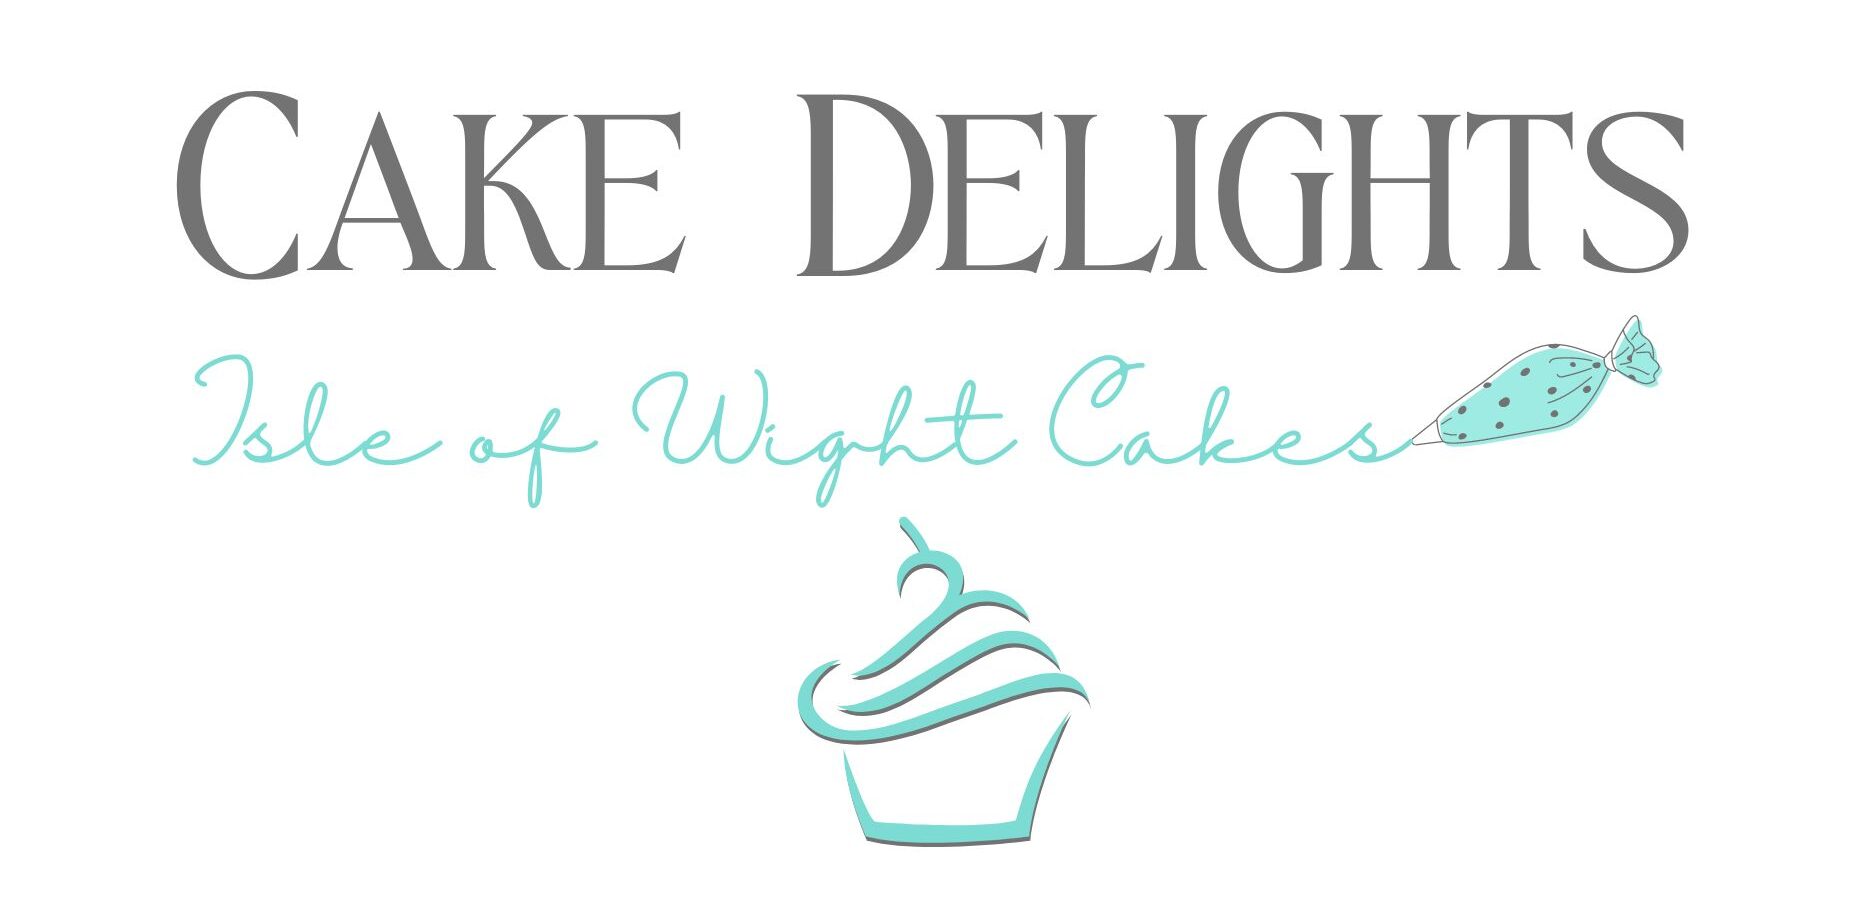 Isle of Wight Cakes